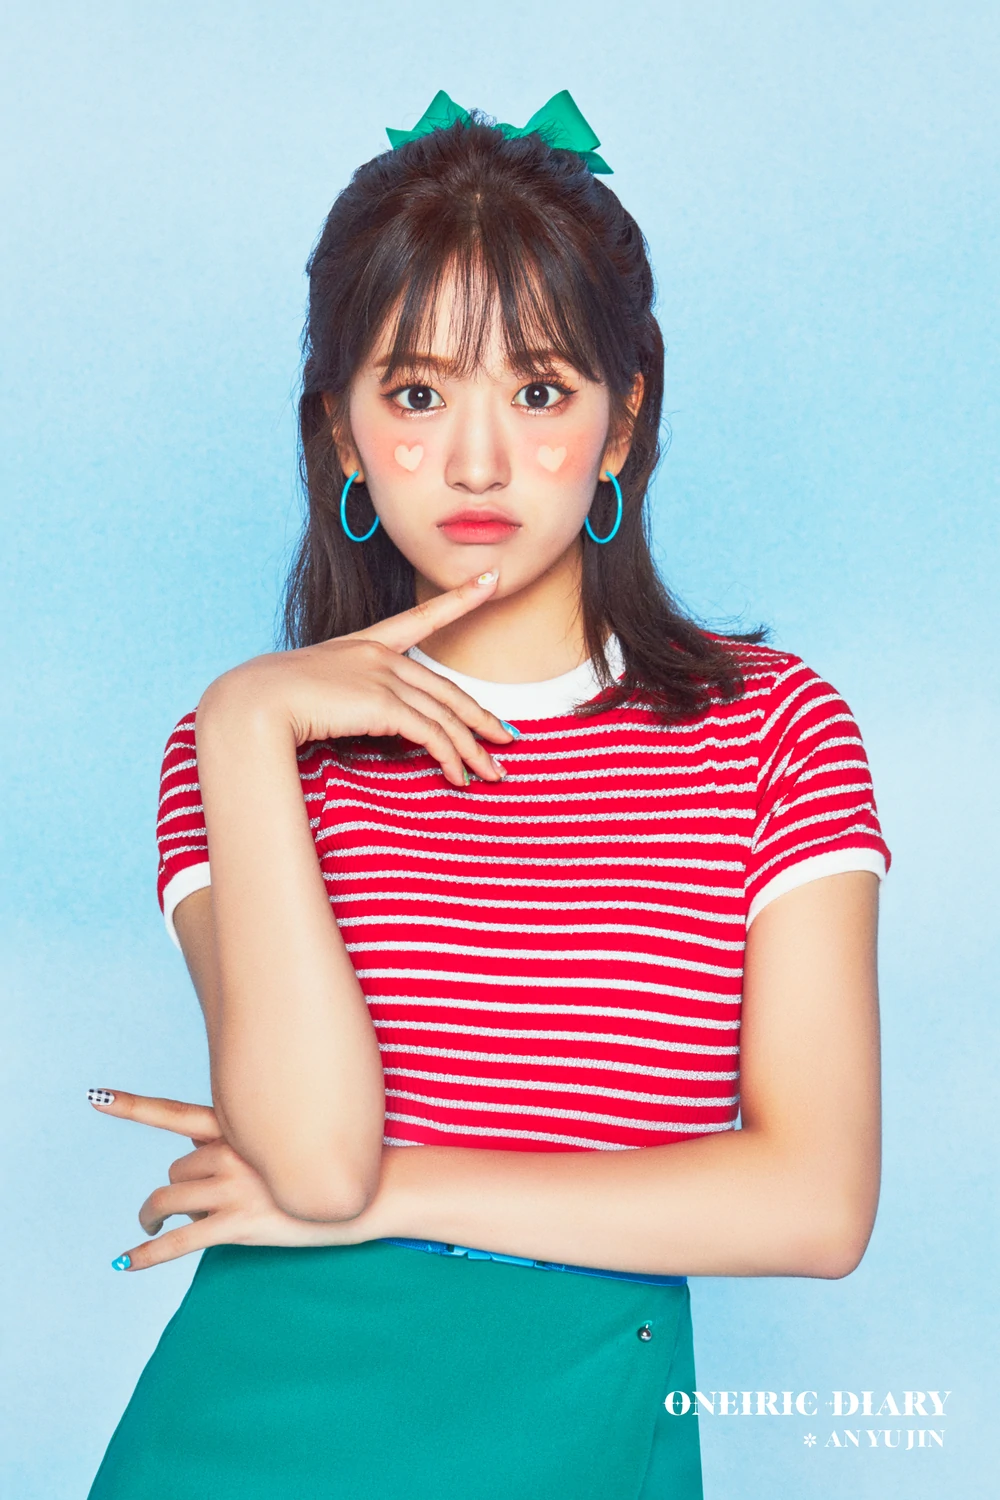 IZ*ONE Oneiric Diary Yujin Concept Teaser Picture Image Photo Kpop K-Concept 2